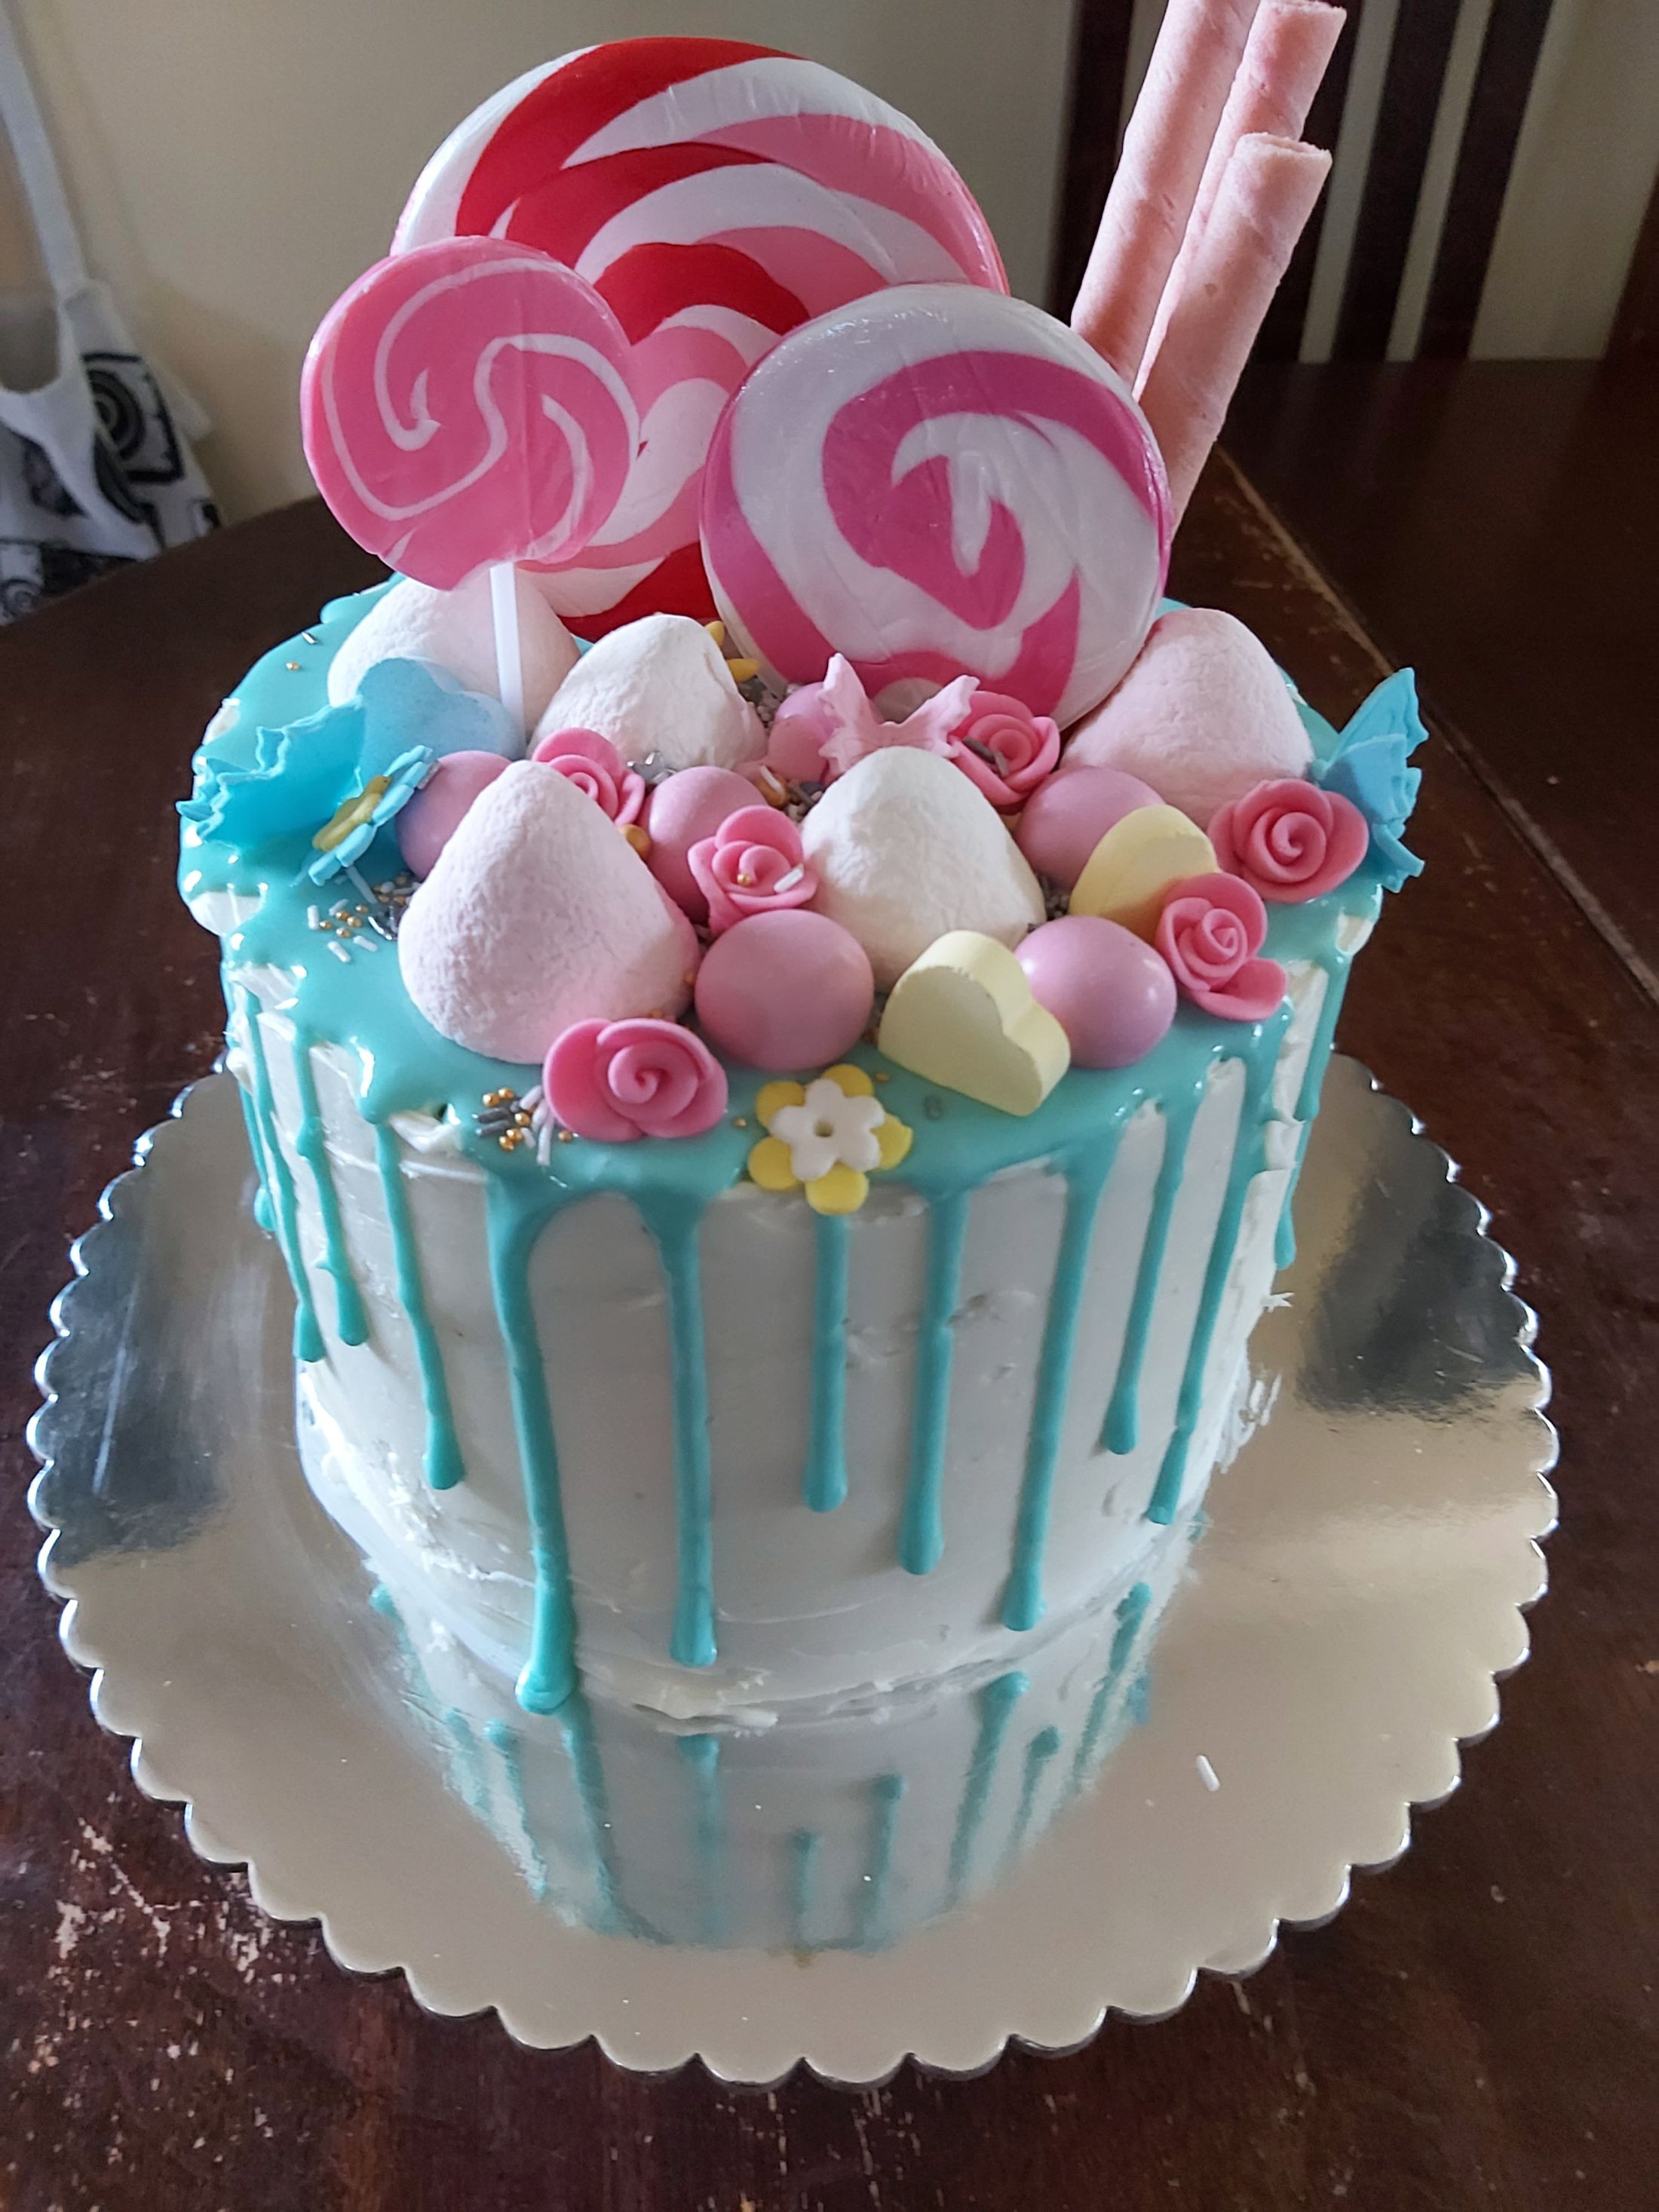 Cake Decorating - Covering a Drip Cake